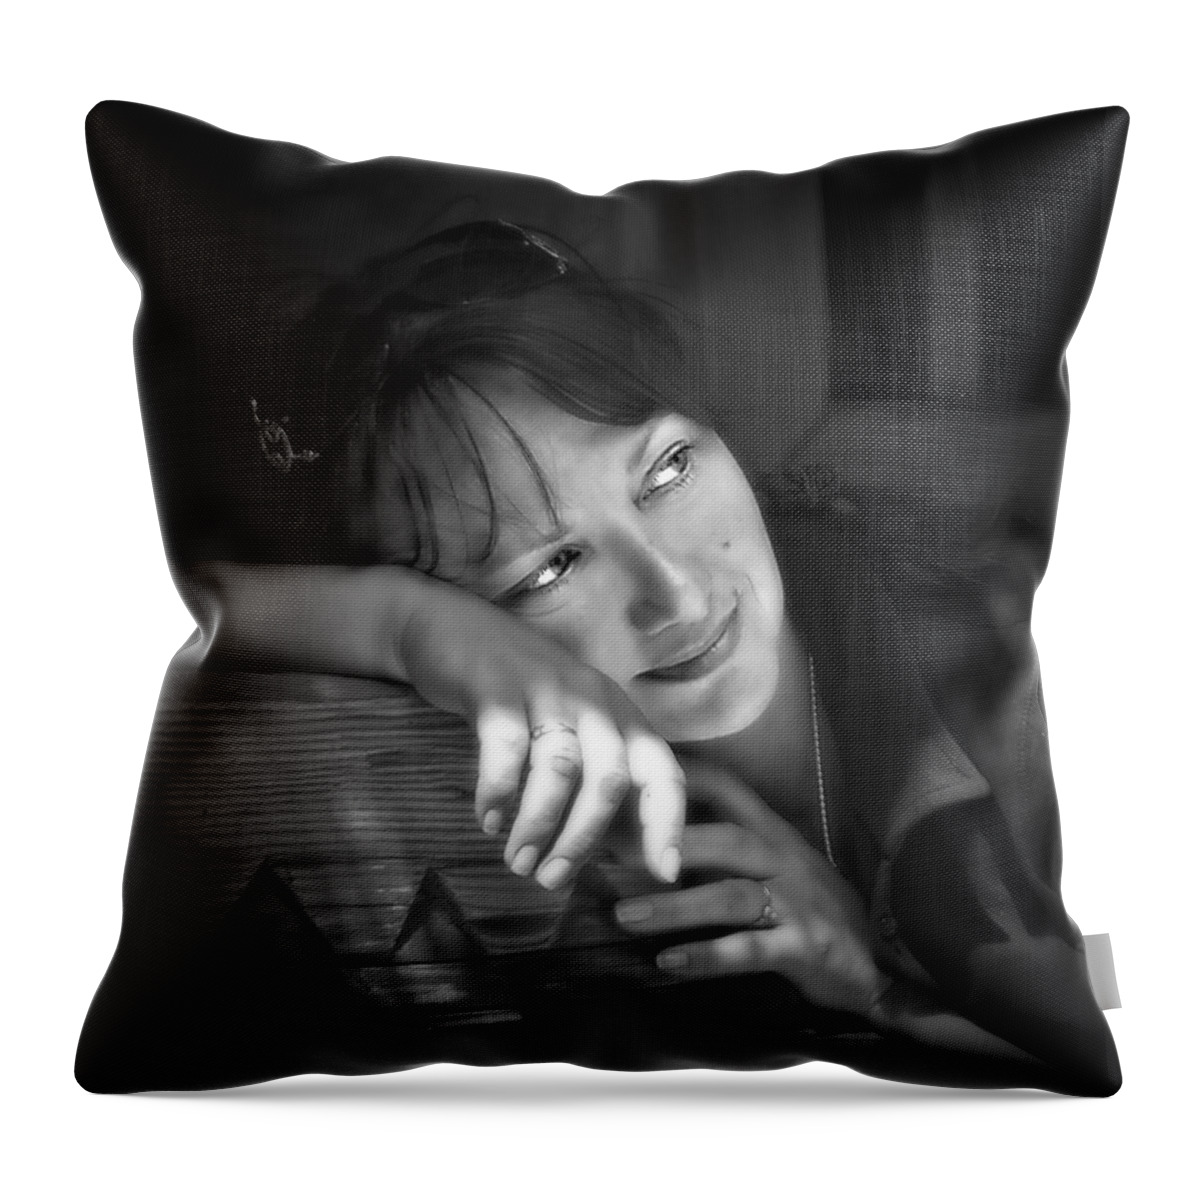 Portrait Throw Pillow featuring the photograph Sweet Memories by Evelina Kremsdorf